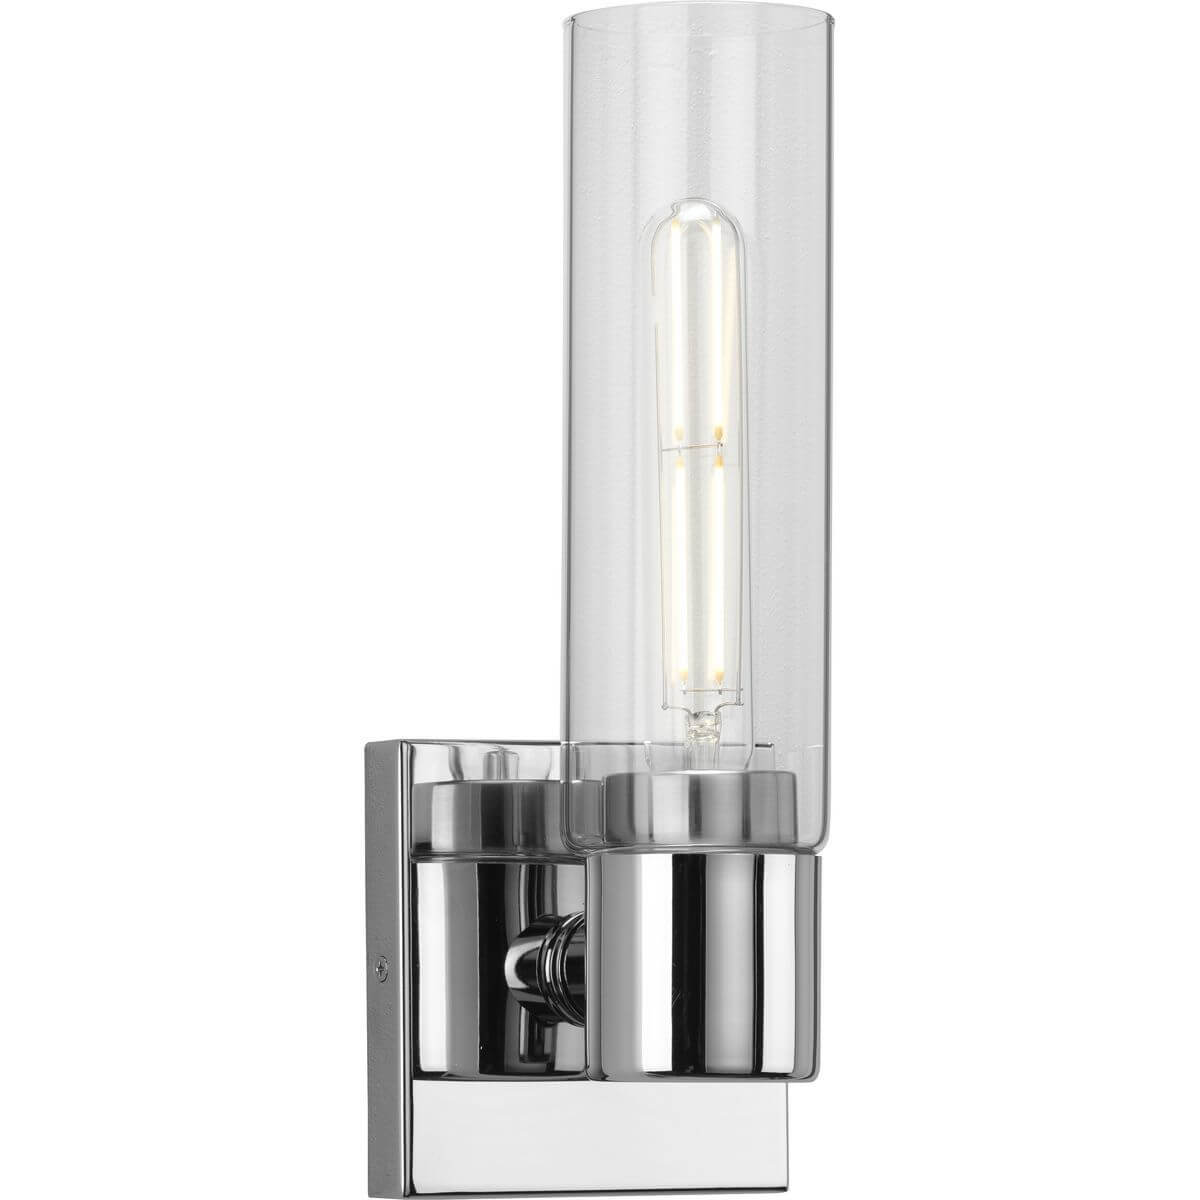 Progress Lighting Clarion 1 Light 13 inch Tall Bath Vanity Light in Polished Chrome with Clear Glass P300299-015